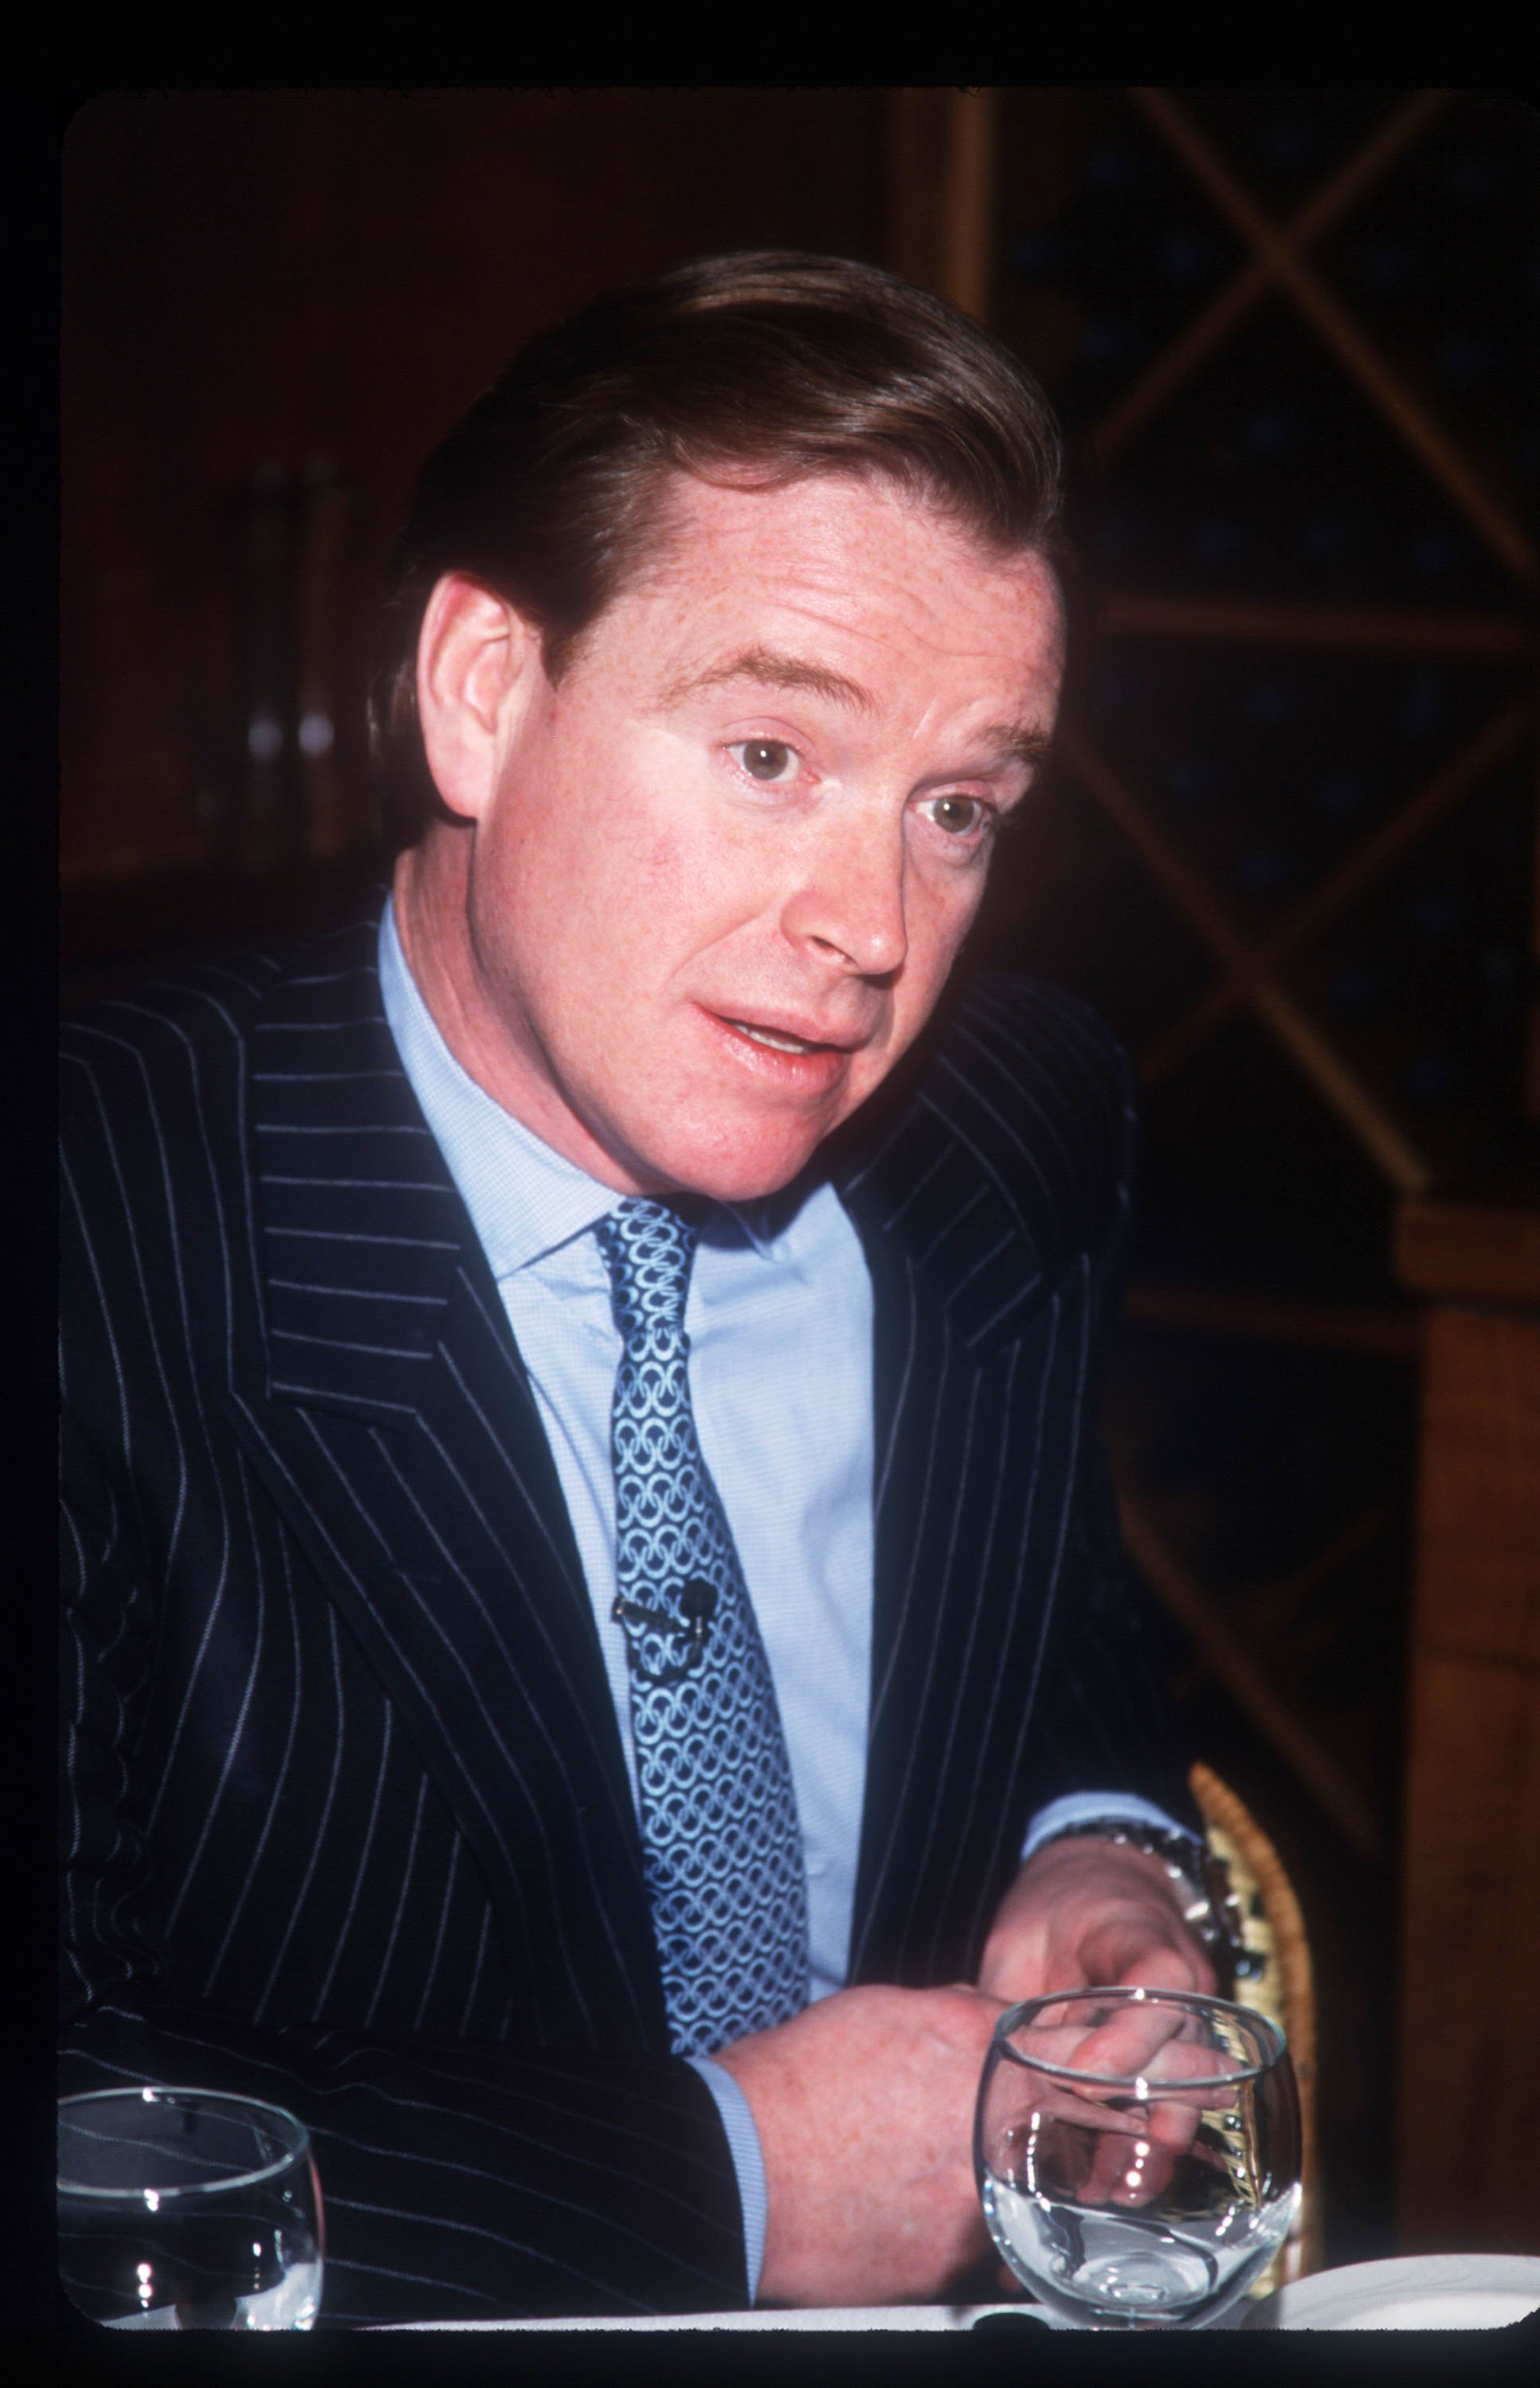 James Hewitt presented his book "Love and War" during an interview with Daphne Barak on October 25, 1999, in New York City | Source: Getty Images